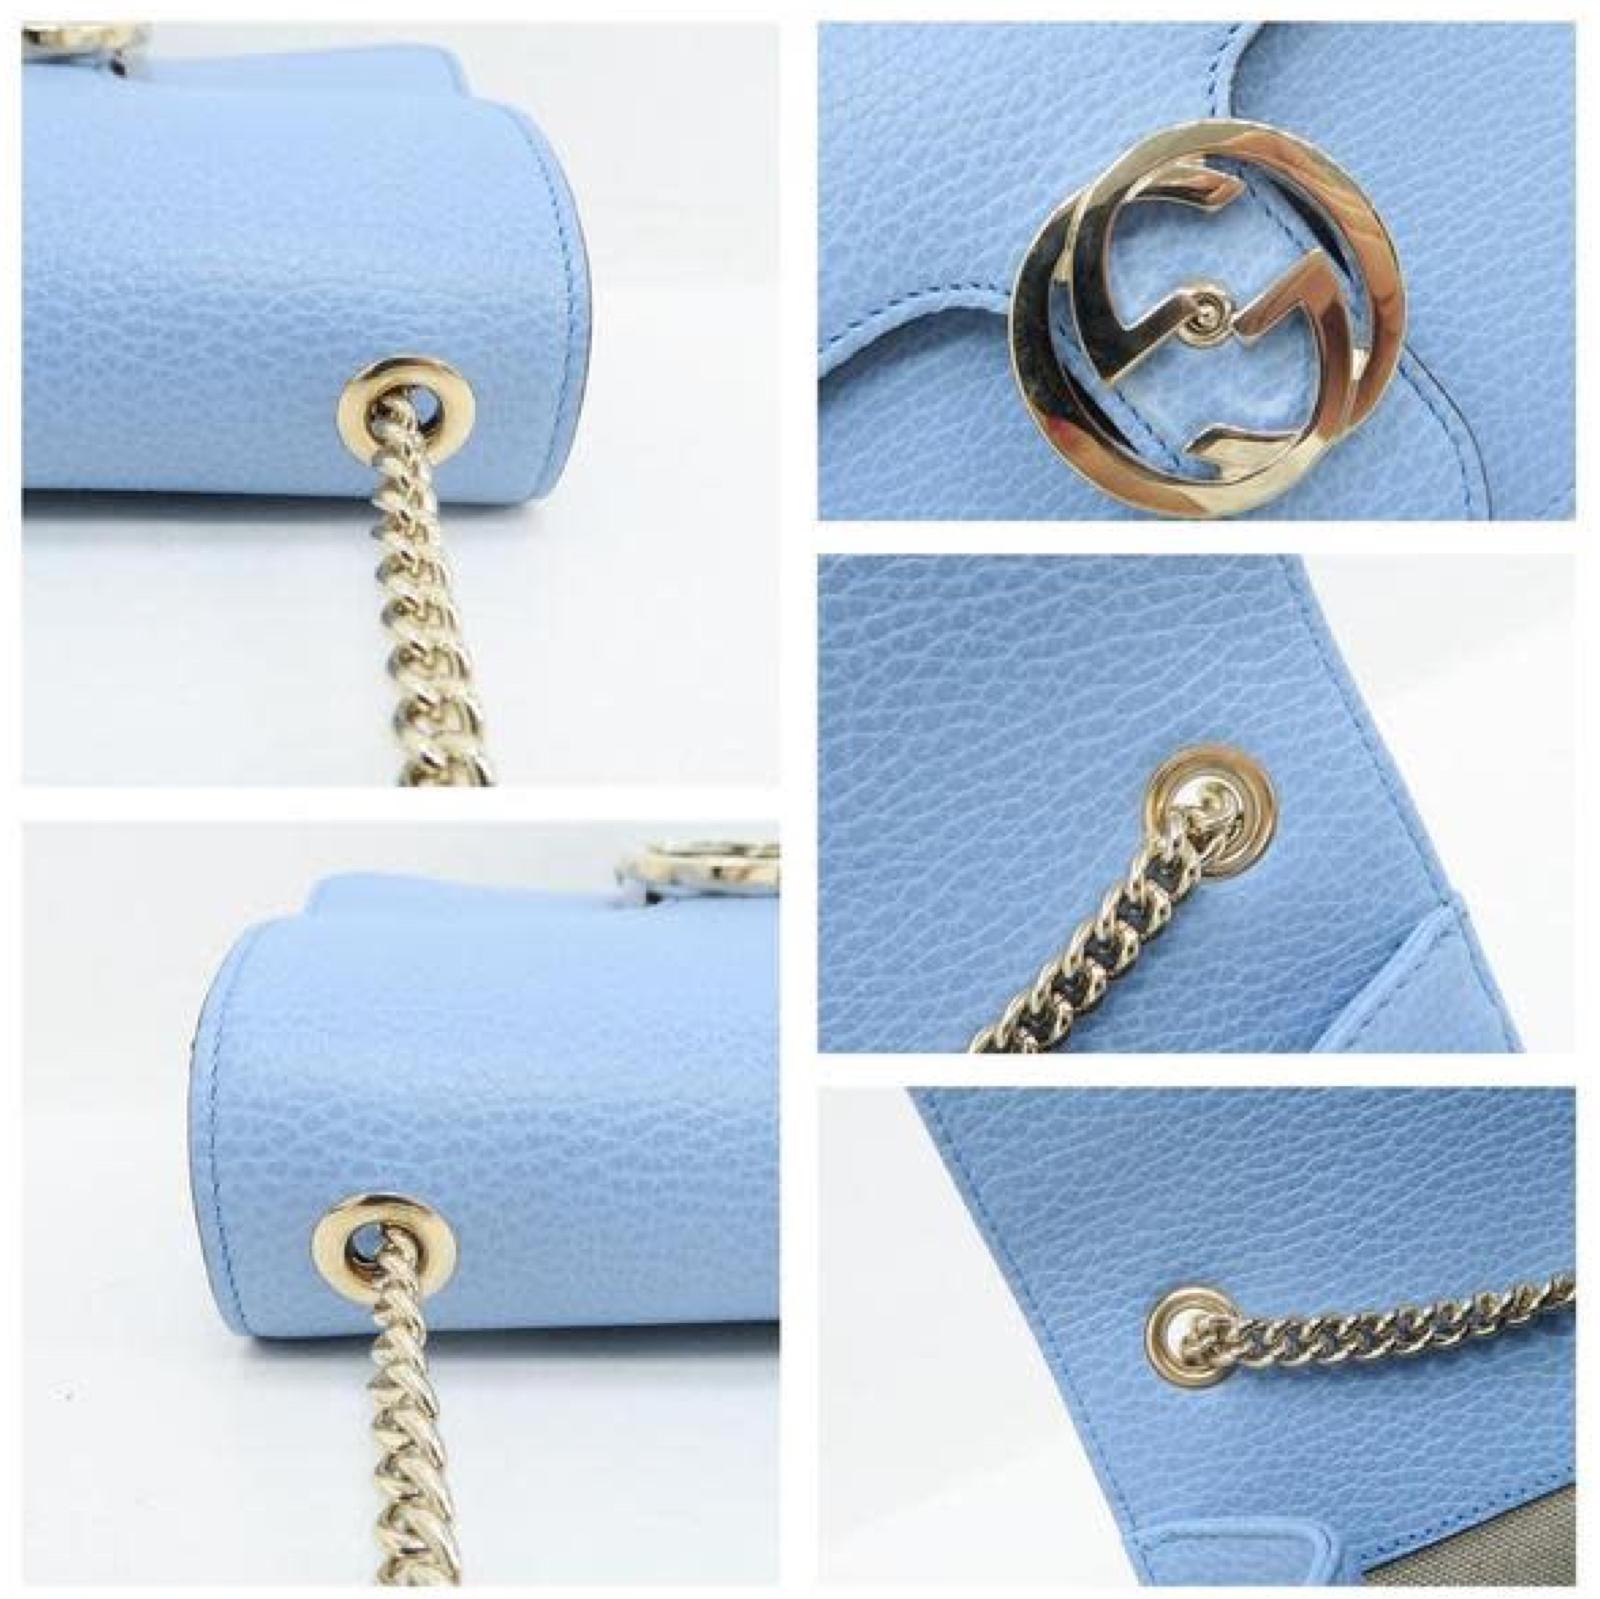 Gucci Dollar Calfskin Interlocking GG Small Shoulder Bag - Baby Blue In New Condition For Sale In Montreal, Quebec